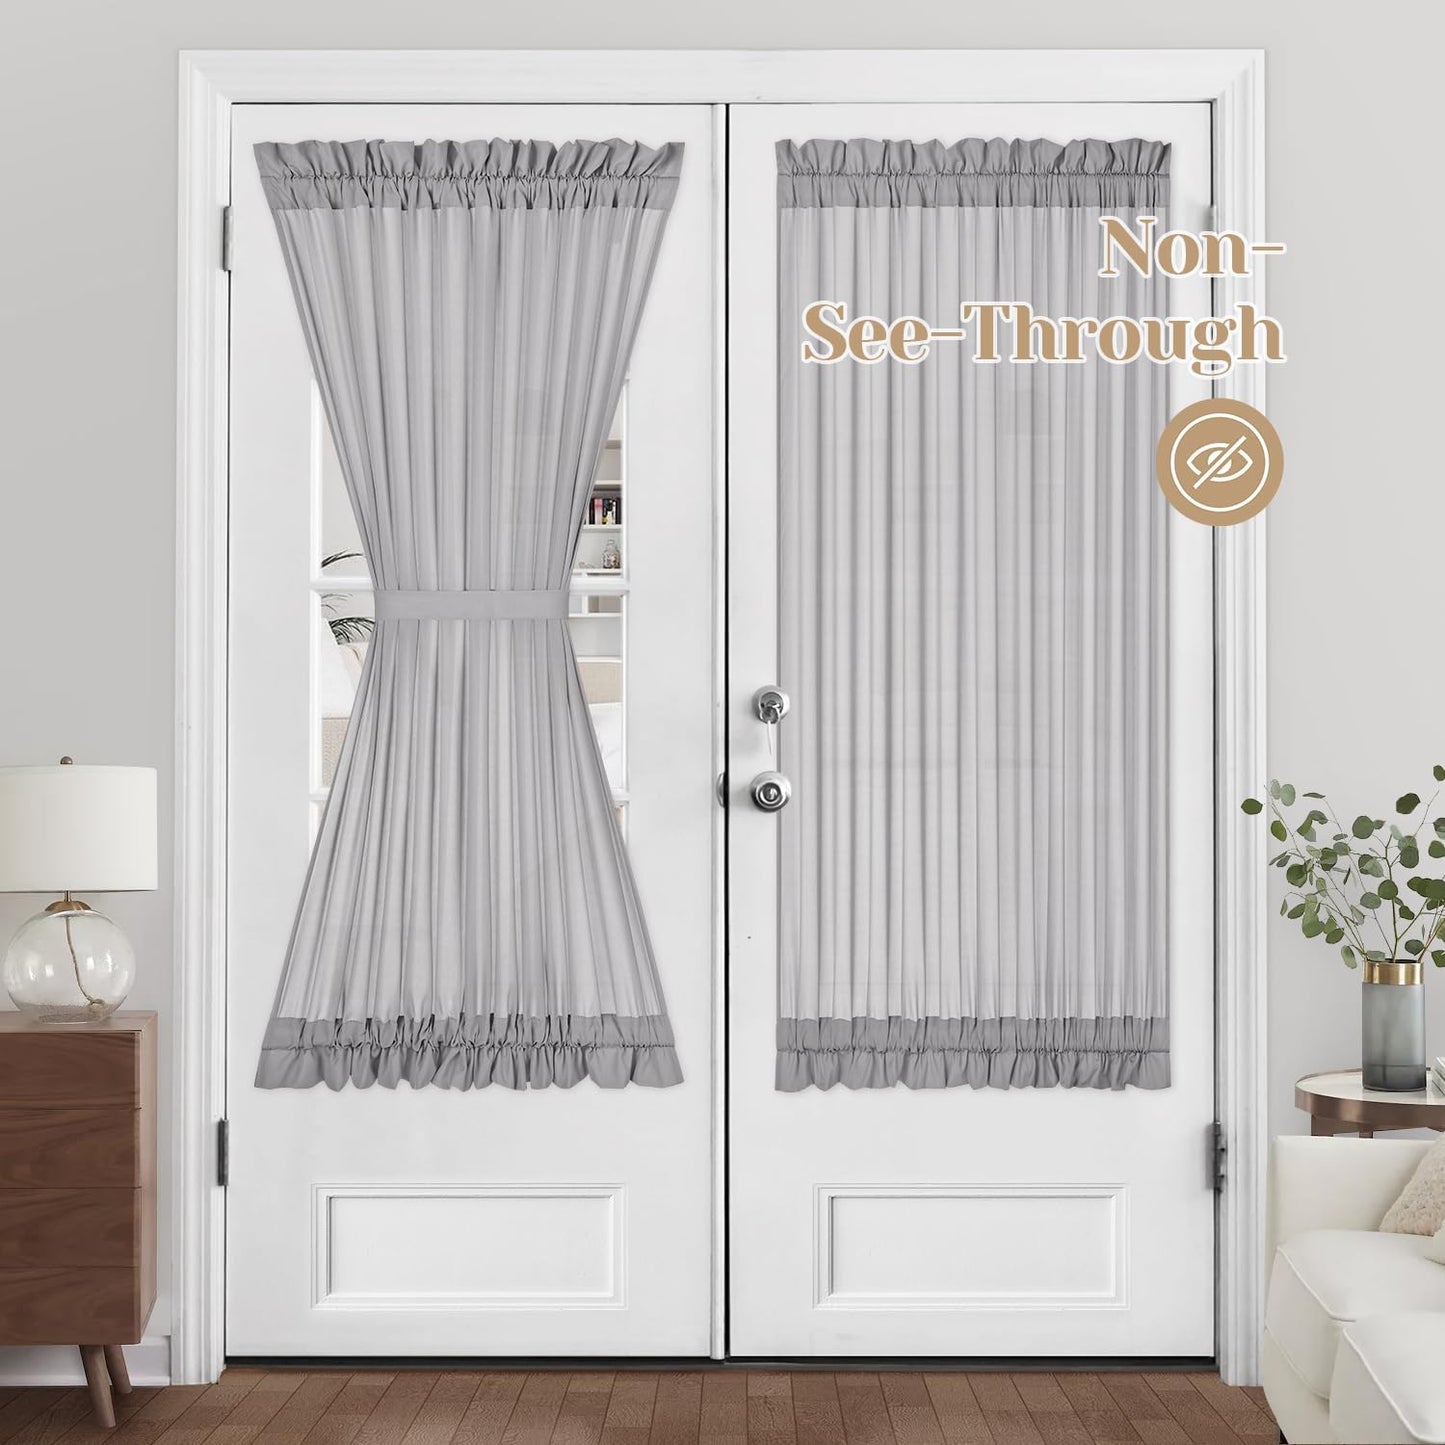 HOMEIDEAS Non-See-Through Sidelight Curtains for Front Door, Privacy Semi Sheer Door Window Curtains, Rod Pocket Light Filtering French Door Curtains with Tieback, (1 Panel, White, 26W X 72L)  HOMEIDEAS Light Grey 1 Panel-54 X 72 